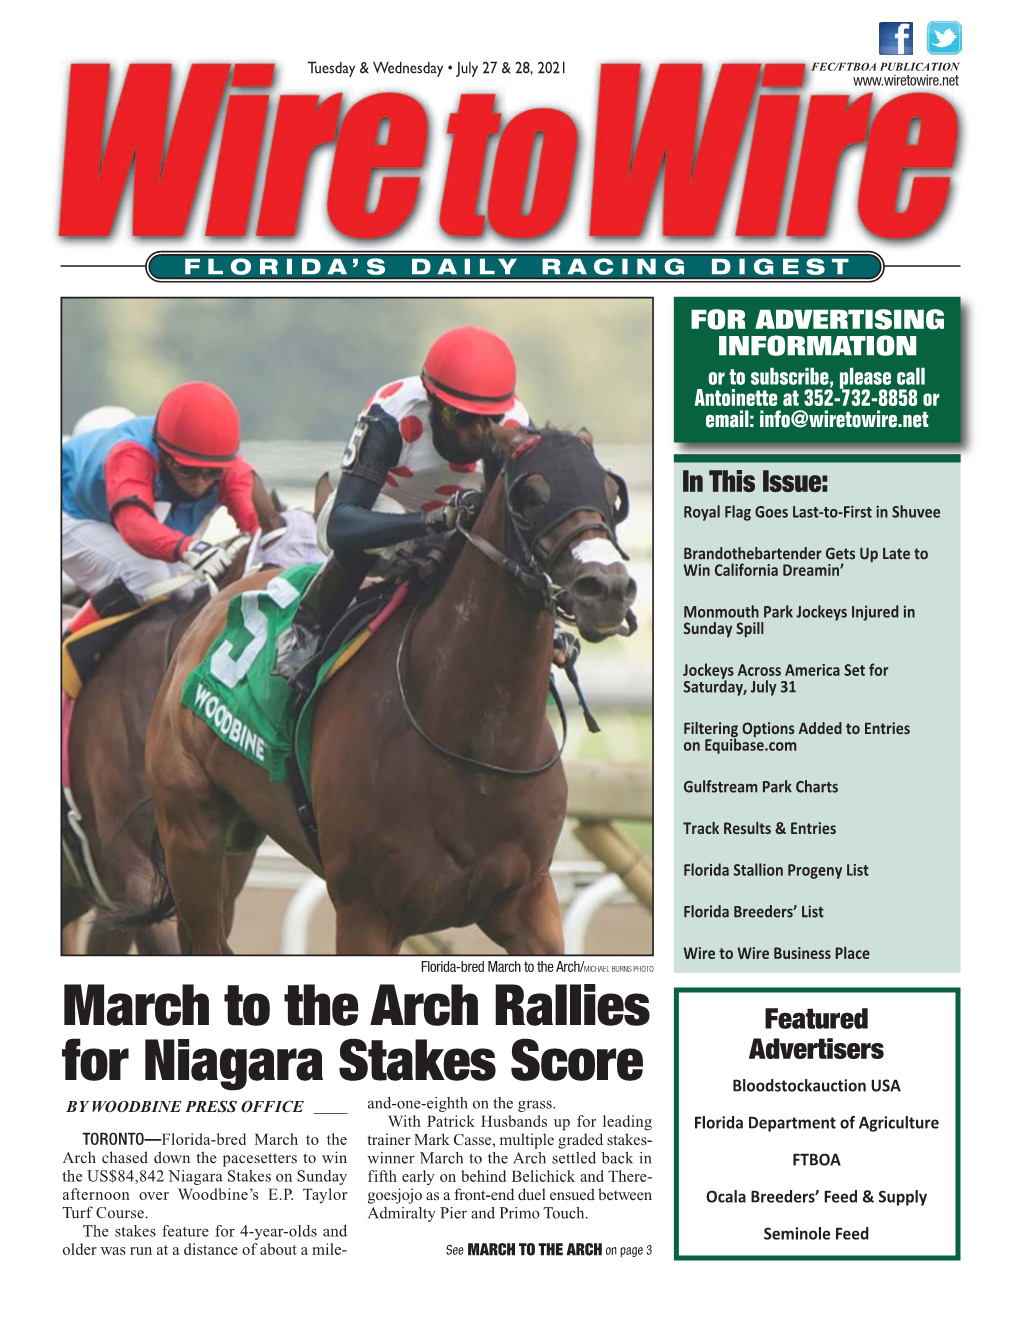 March to the Arch Rallies for Niagara Stakes Score